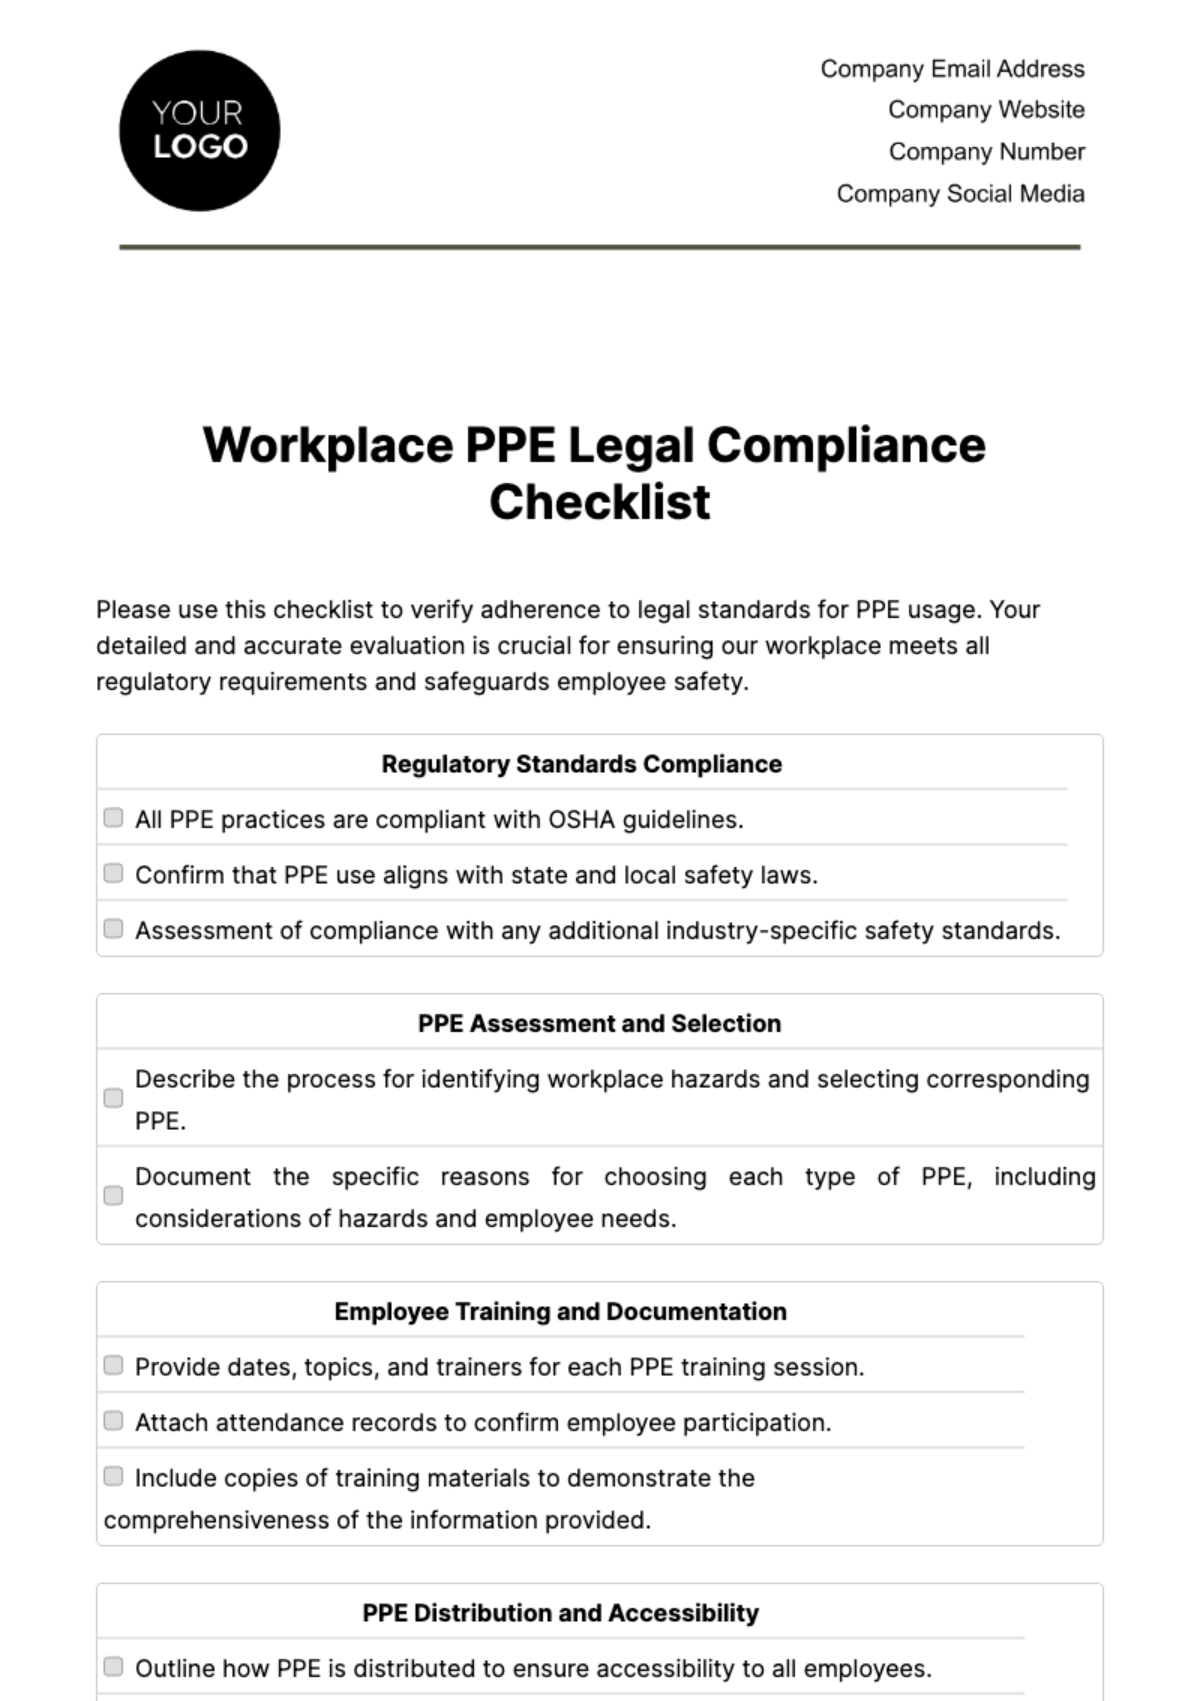 Free Workplace PPE Legal Compliance Checklist Template